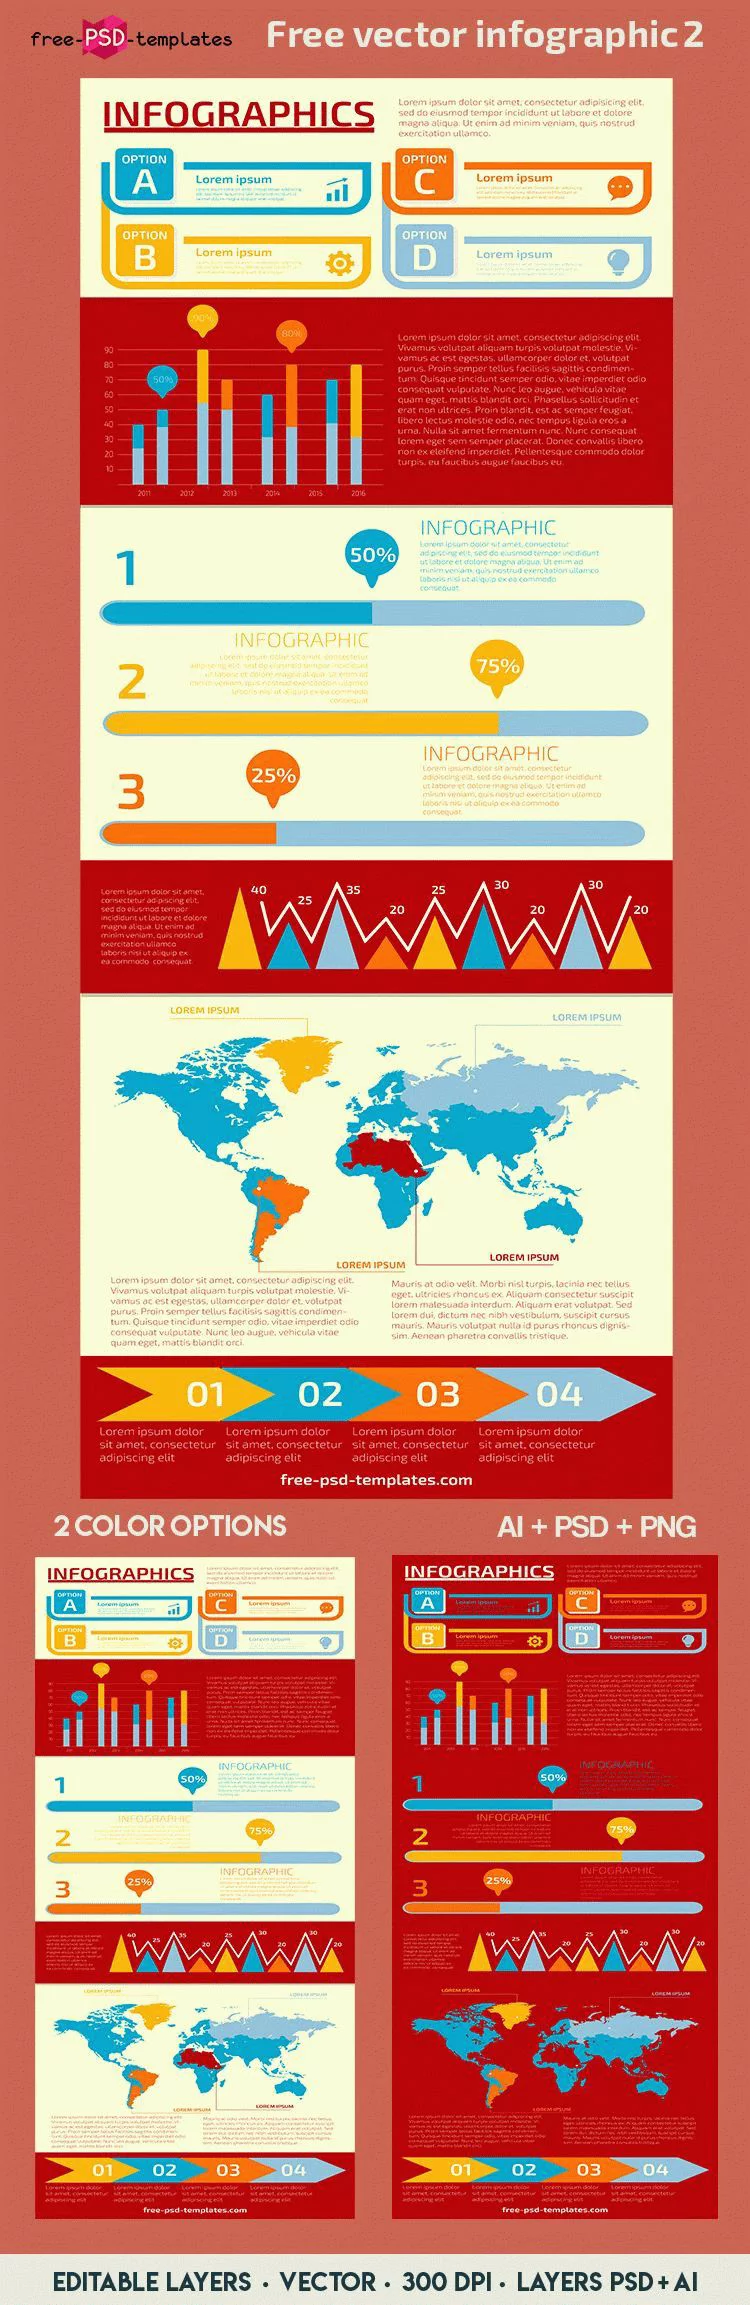 Free Vector Infographic